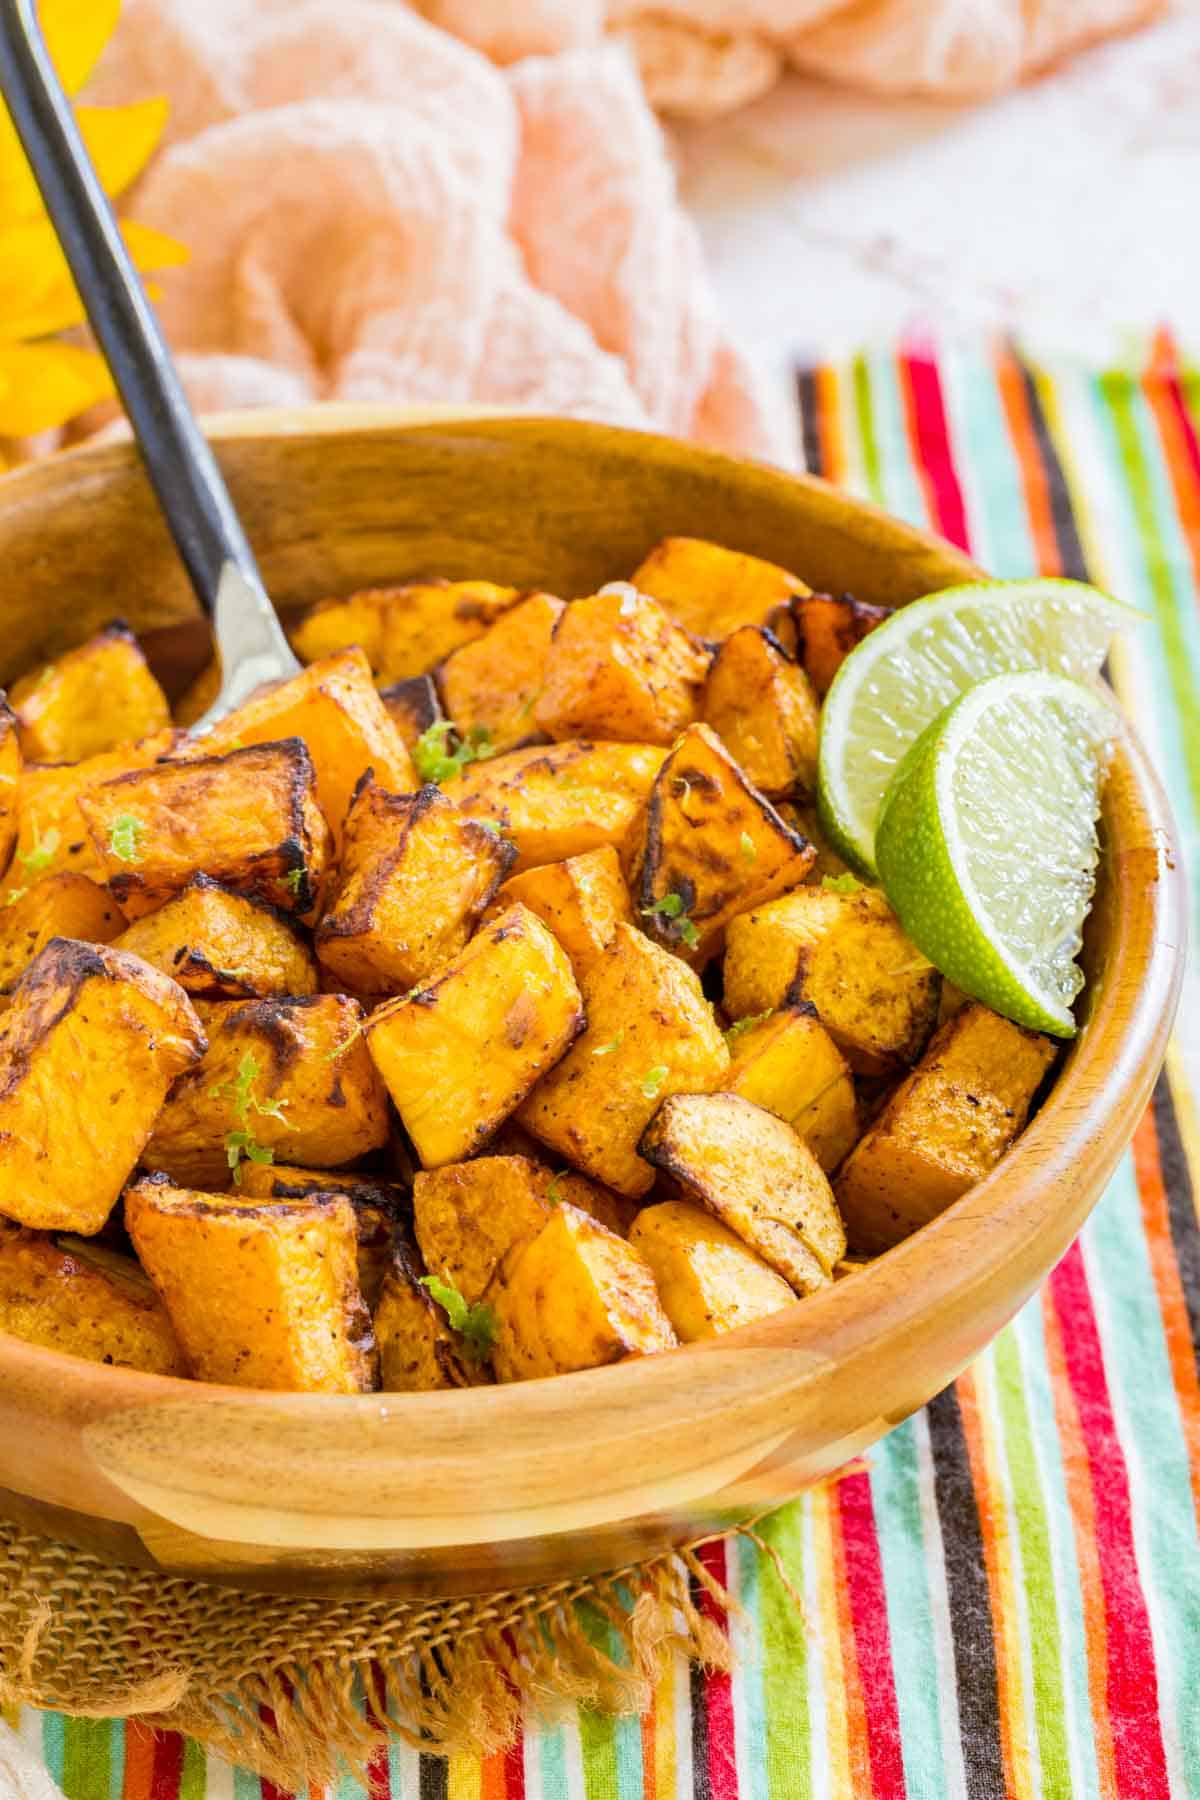 Cubes of roasted butternut squash in a wooden bowl garnished with lime zest and lime wedges.